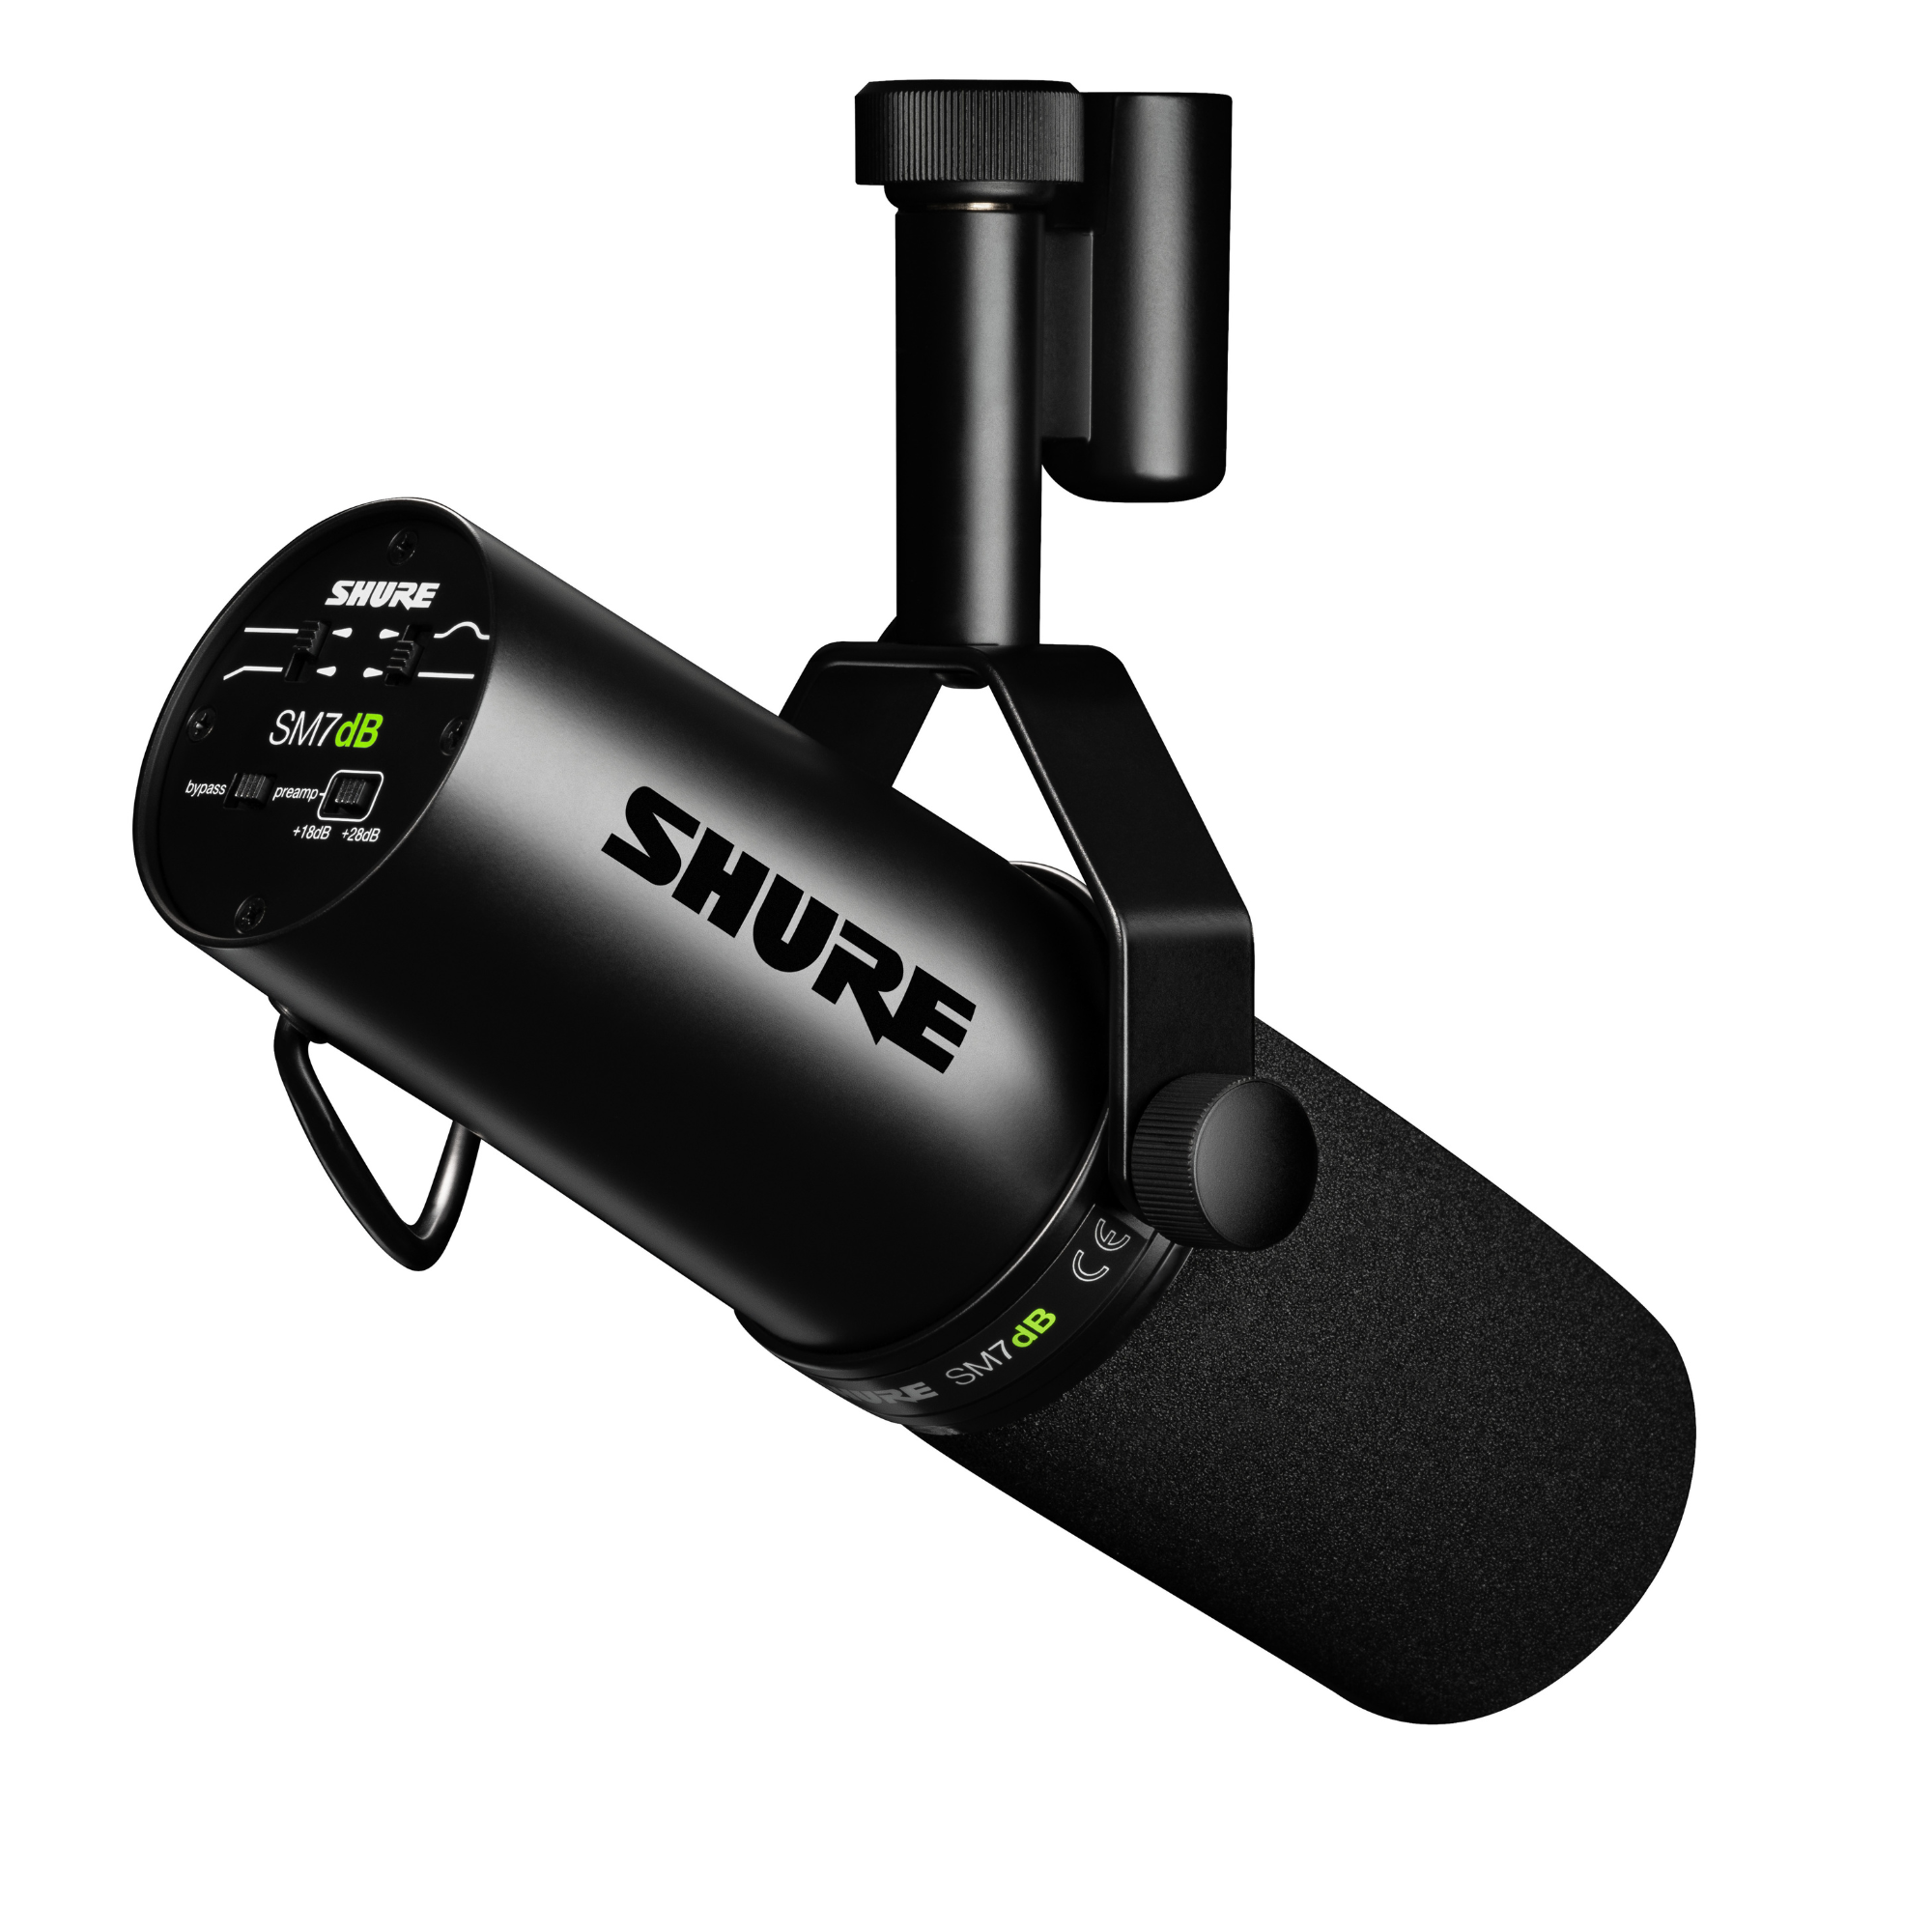 Shure SM7db Active Dynamic Vocal Microphone